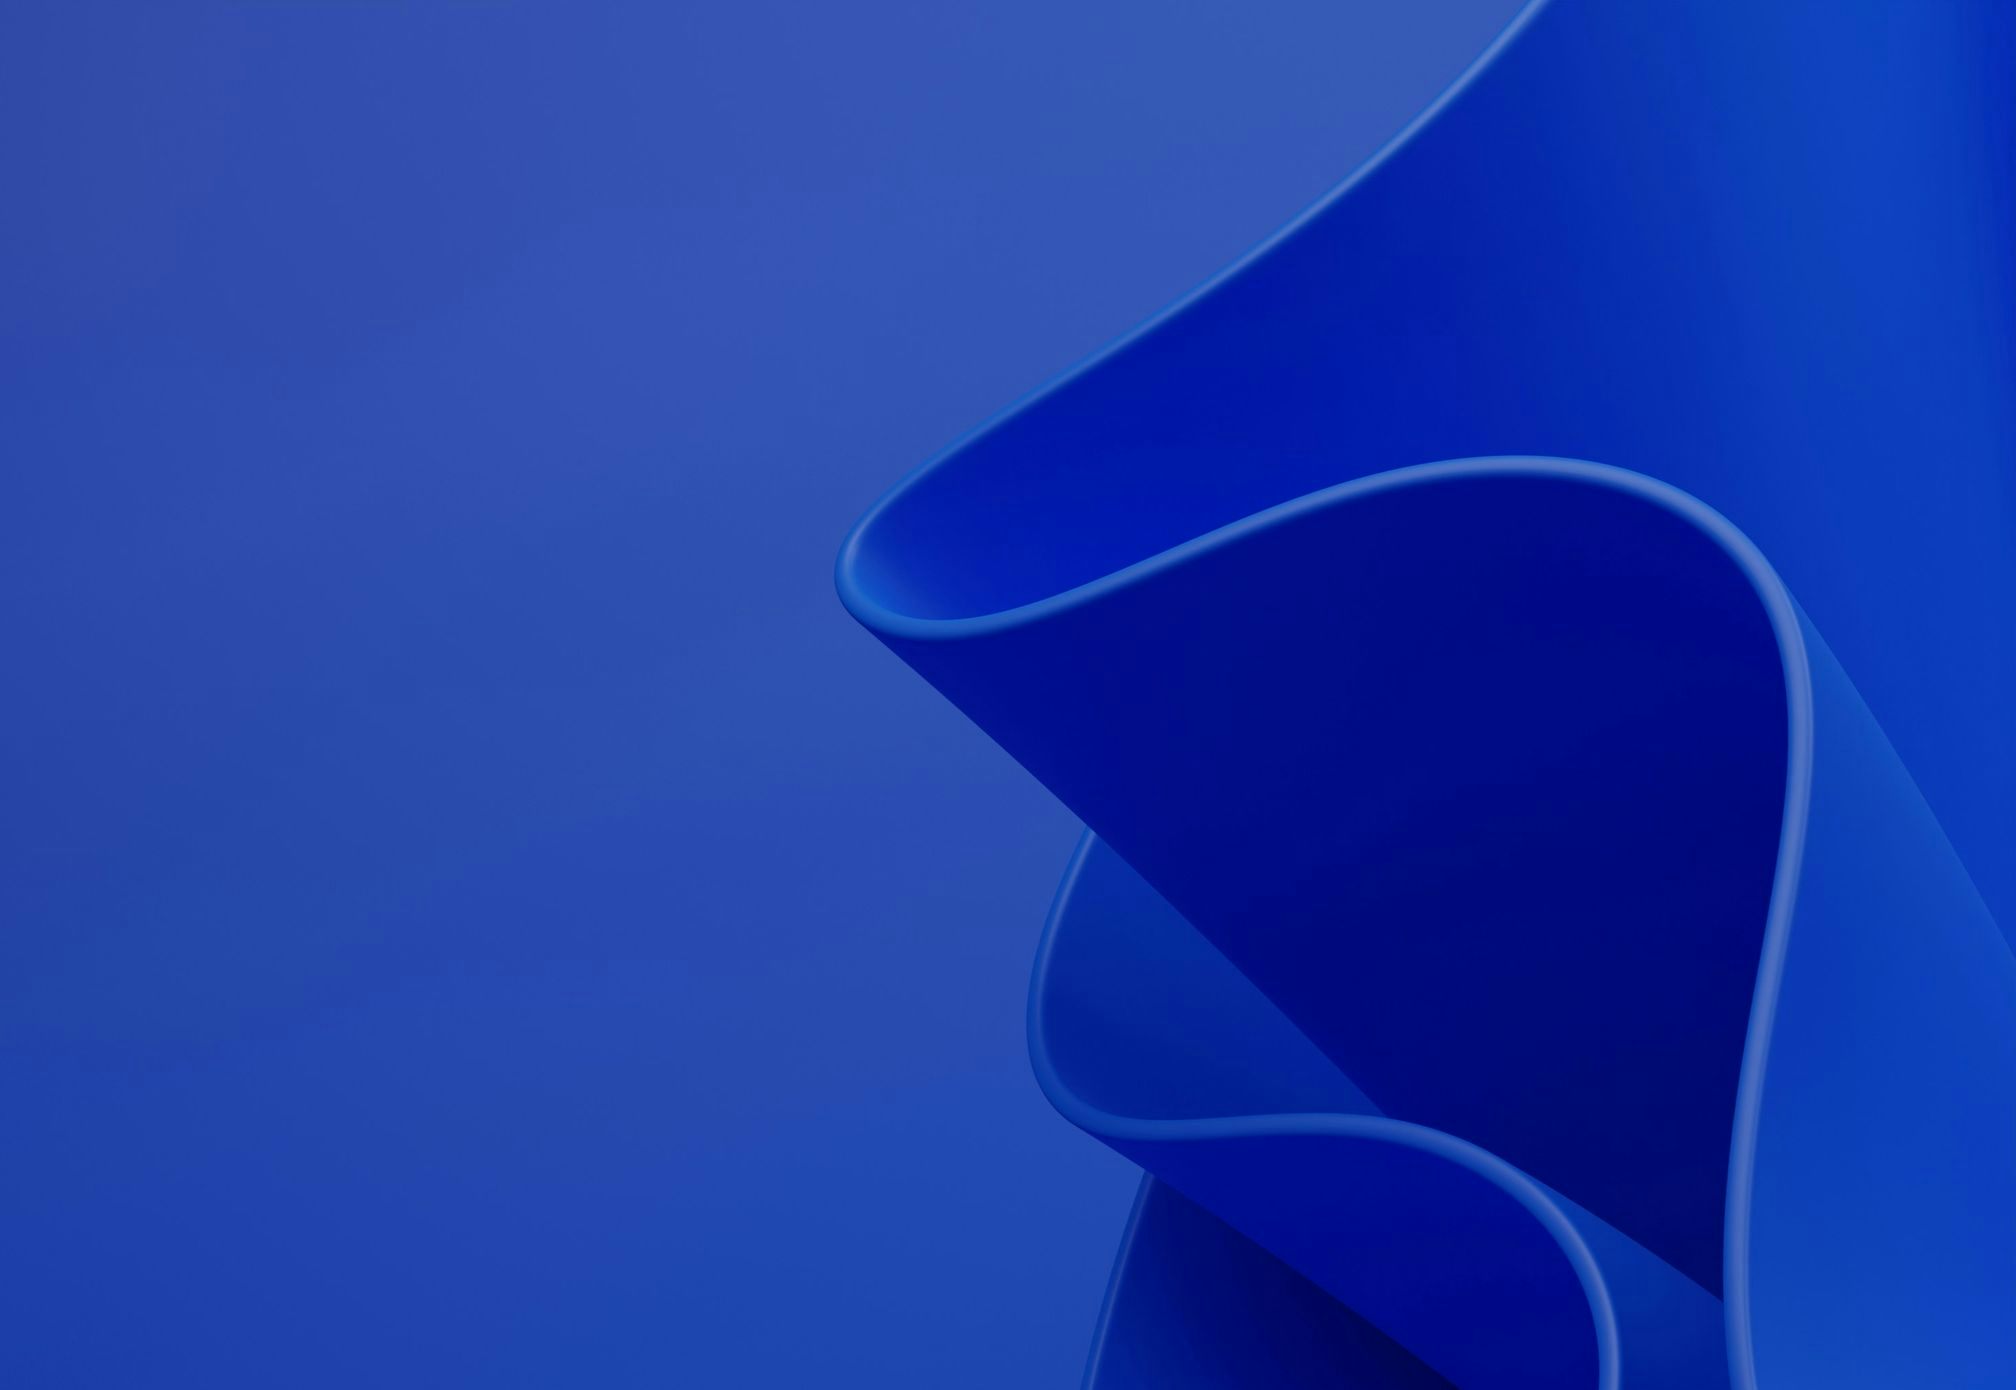 Abstract blue wavy design on a gradient blue background.